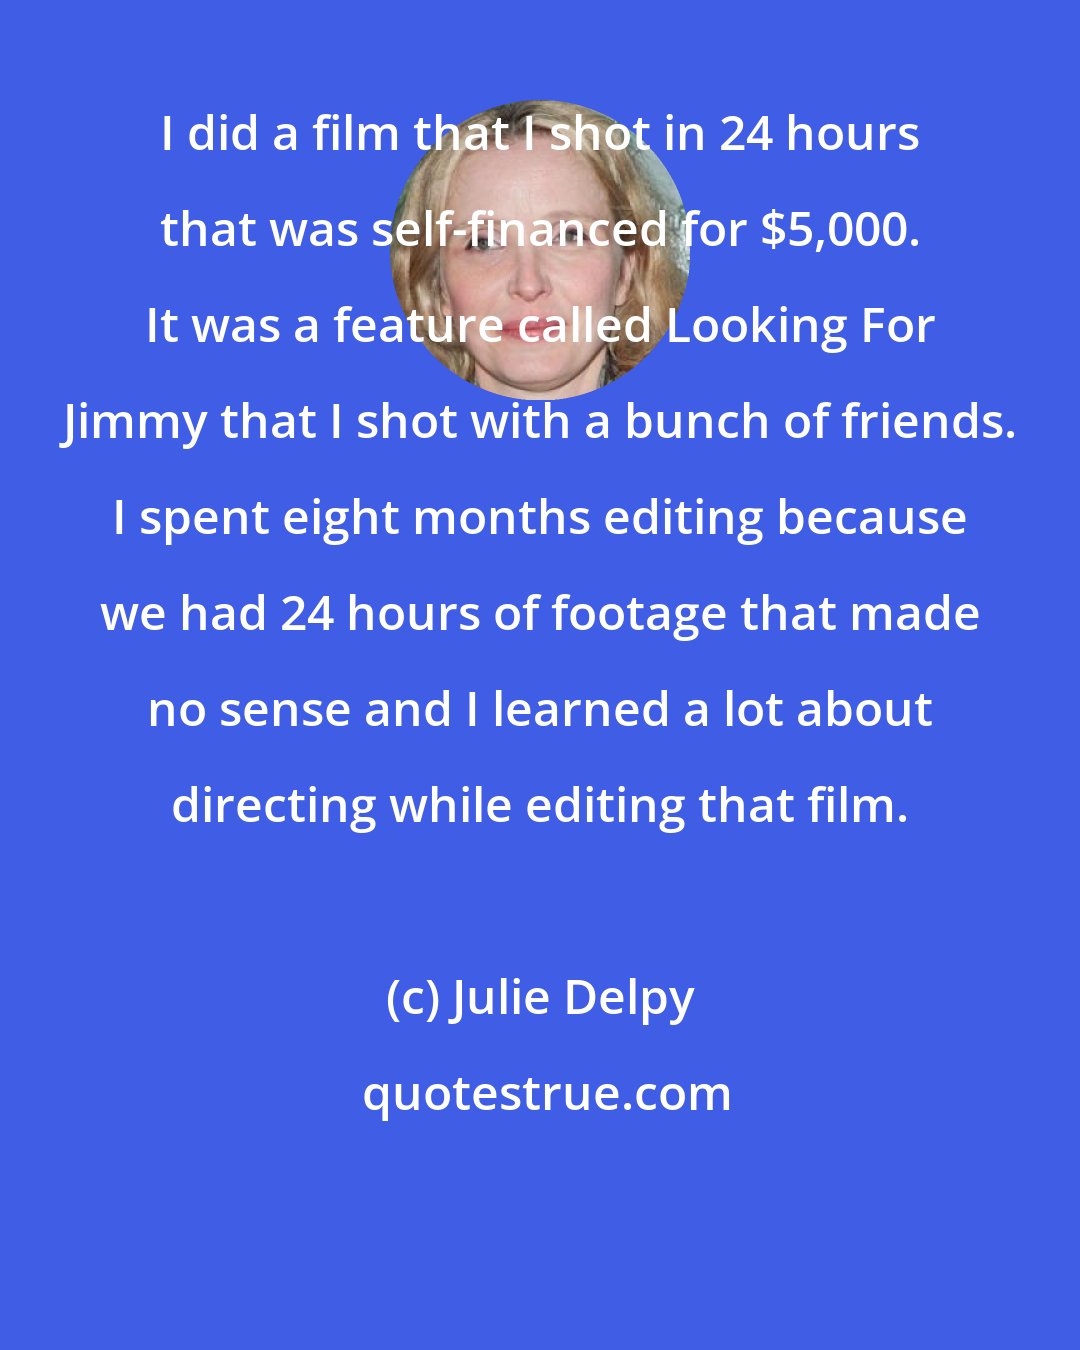 Julie Delpy: I did a film that I shot in 24 hours that was self-financed for $5,000. It was a feature called Looking For Jimmy that I shot with a bunch of friends. I spent eight months editing because we had 24 hours of footage that made no sense and I learned a lot about directing while editing that film.